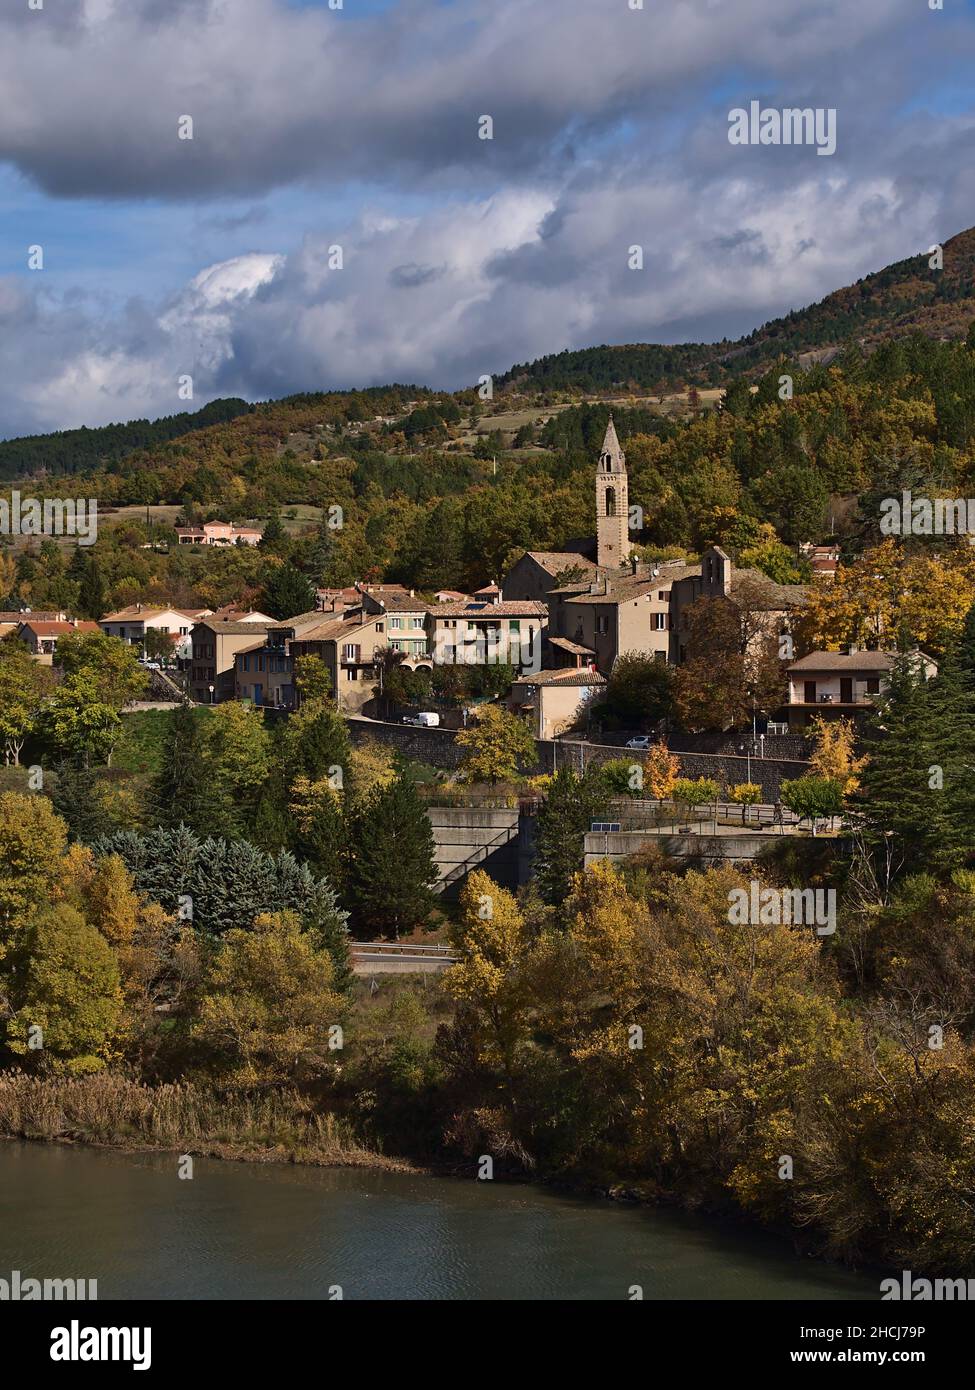 Beautiful view of small village with church and traditional buildings, part of town Sisteron, Provence, France, surrounded by colorful trees in autumn. Stock Photo